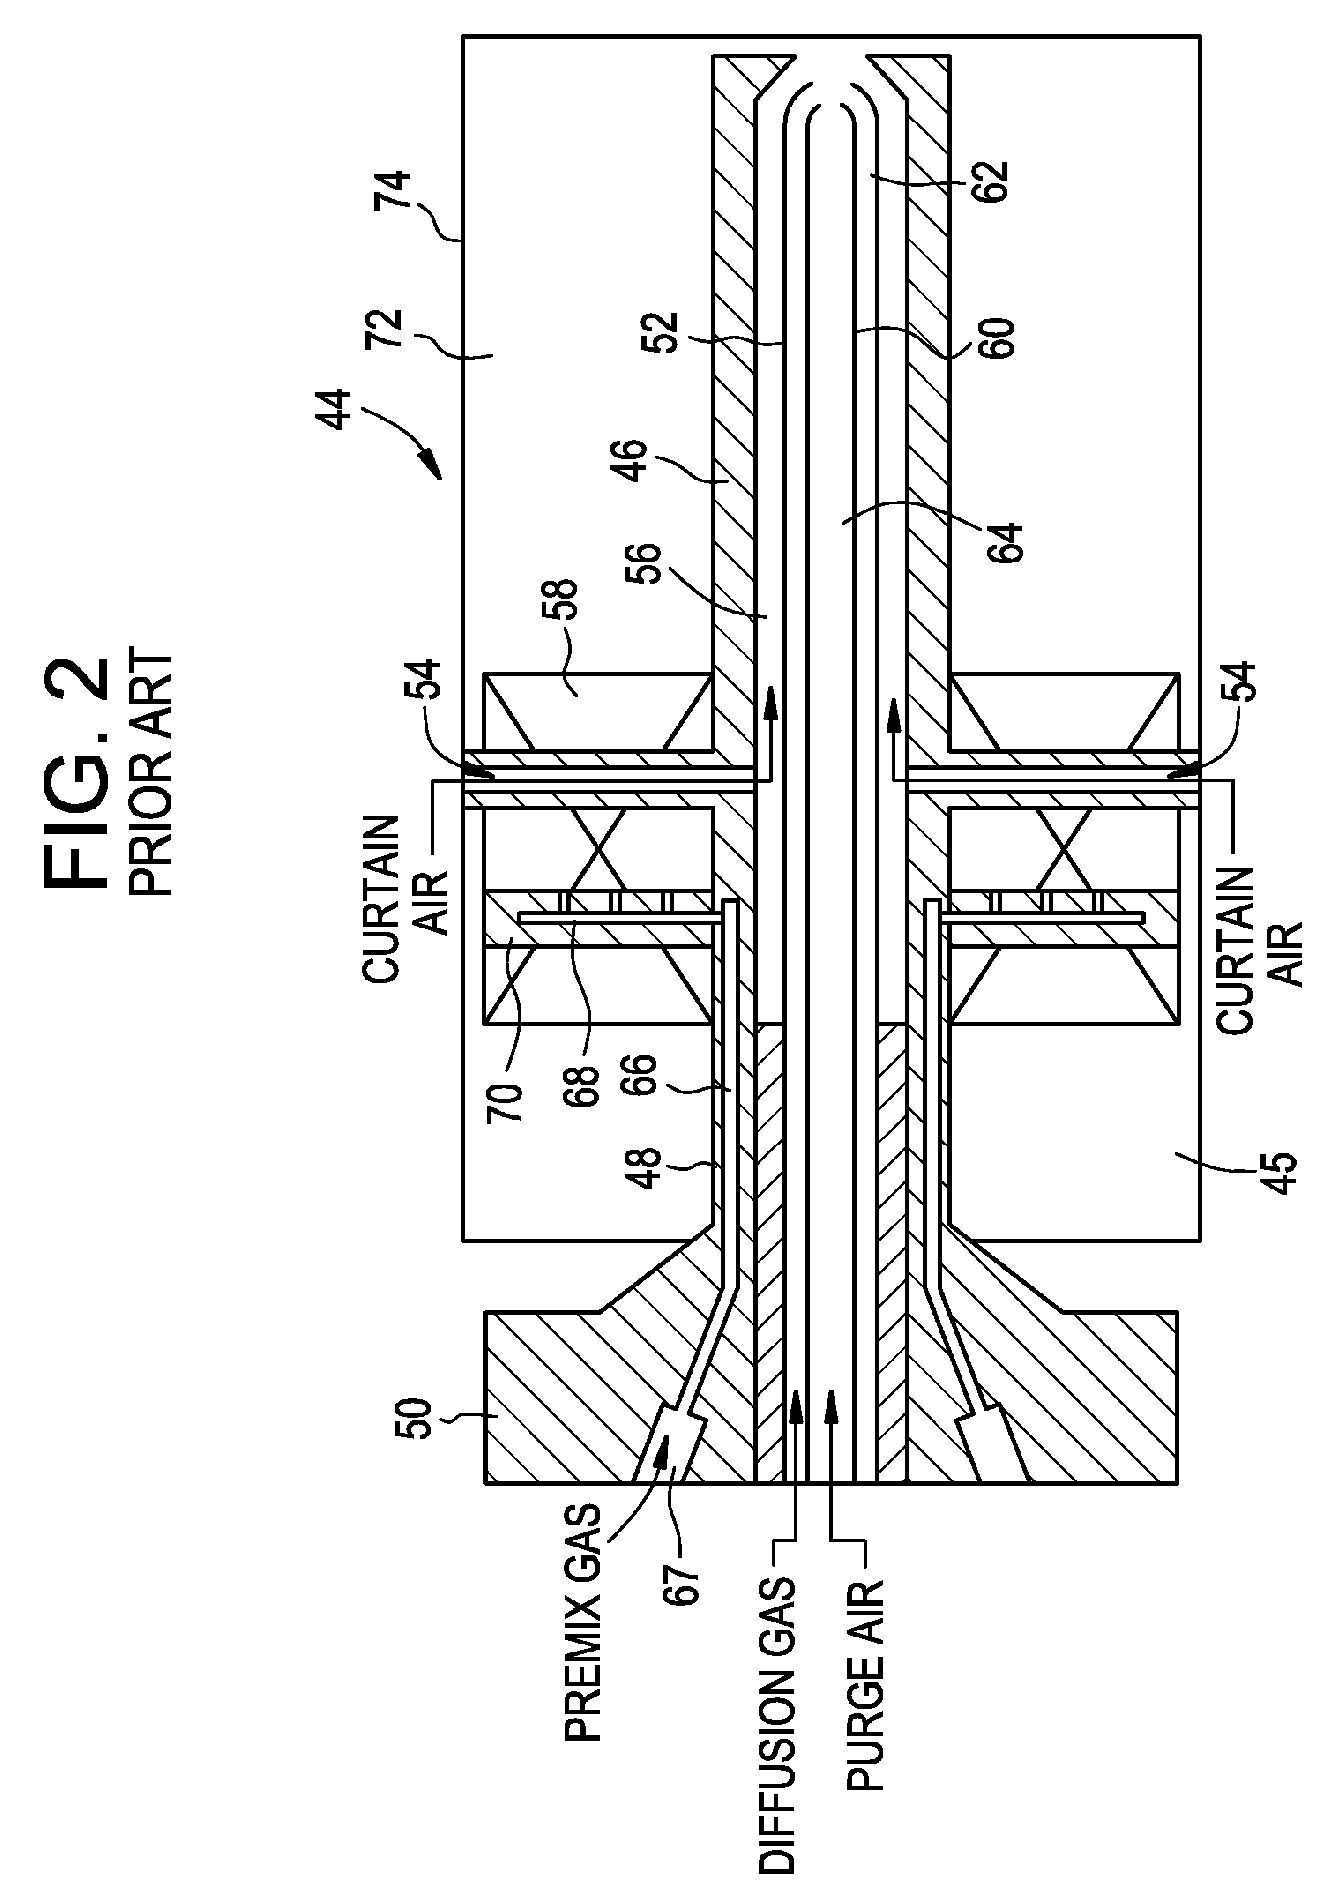 Method and apparatus for cooling gas turbine fuel nozzles